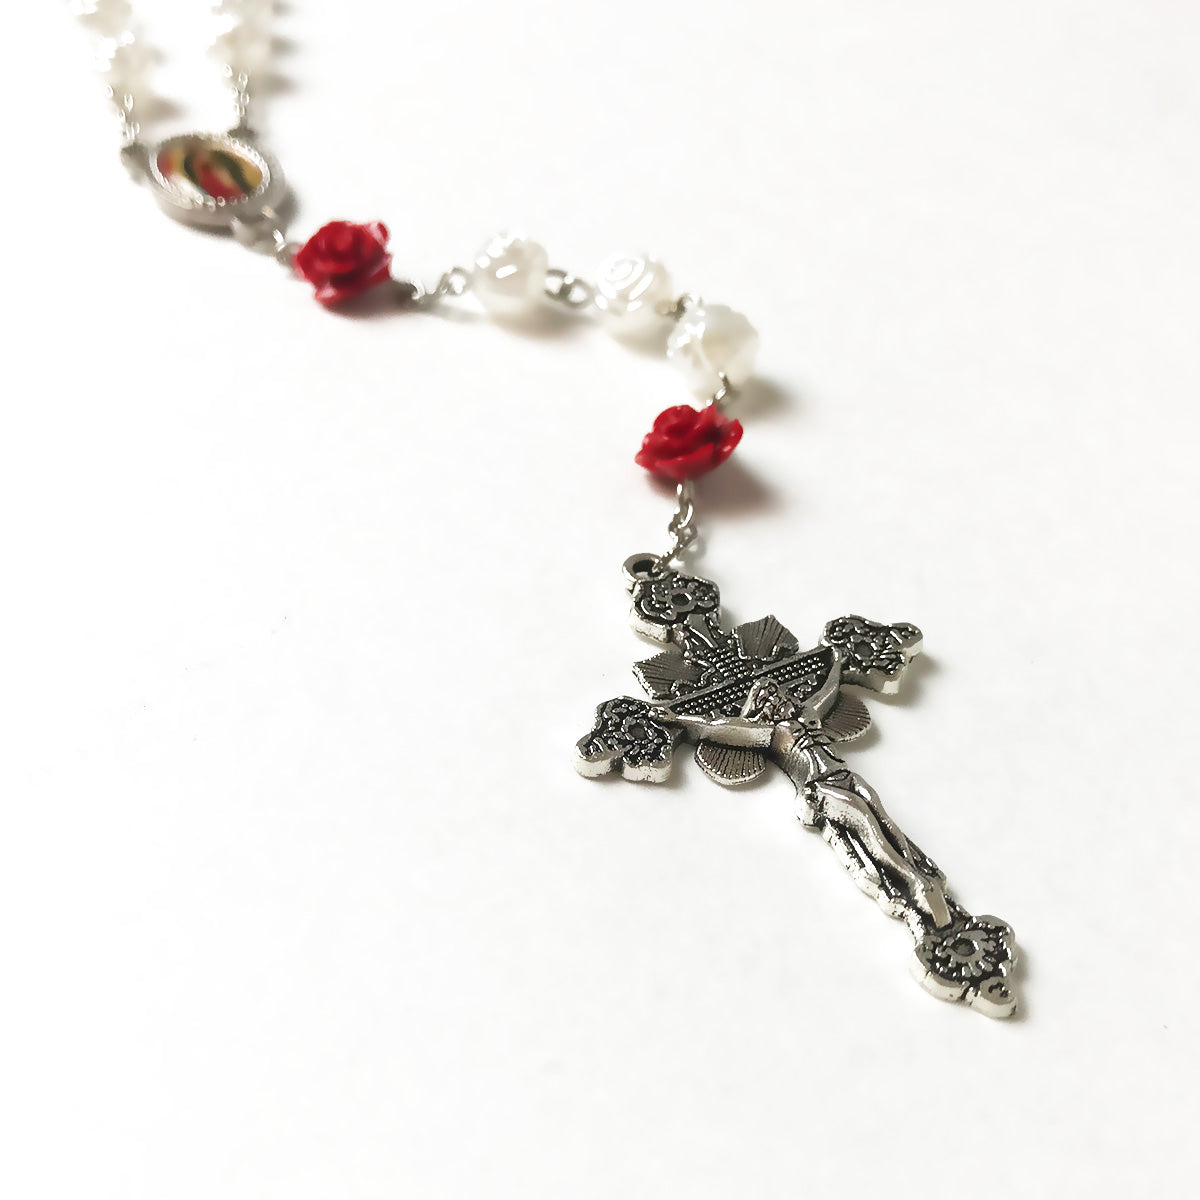 Our Lady Of Guadalupe Pearl Rose Rosary